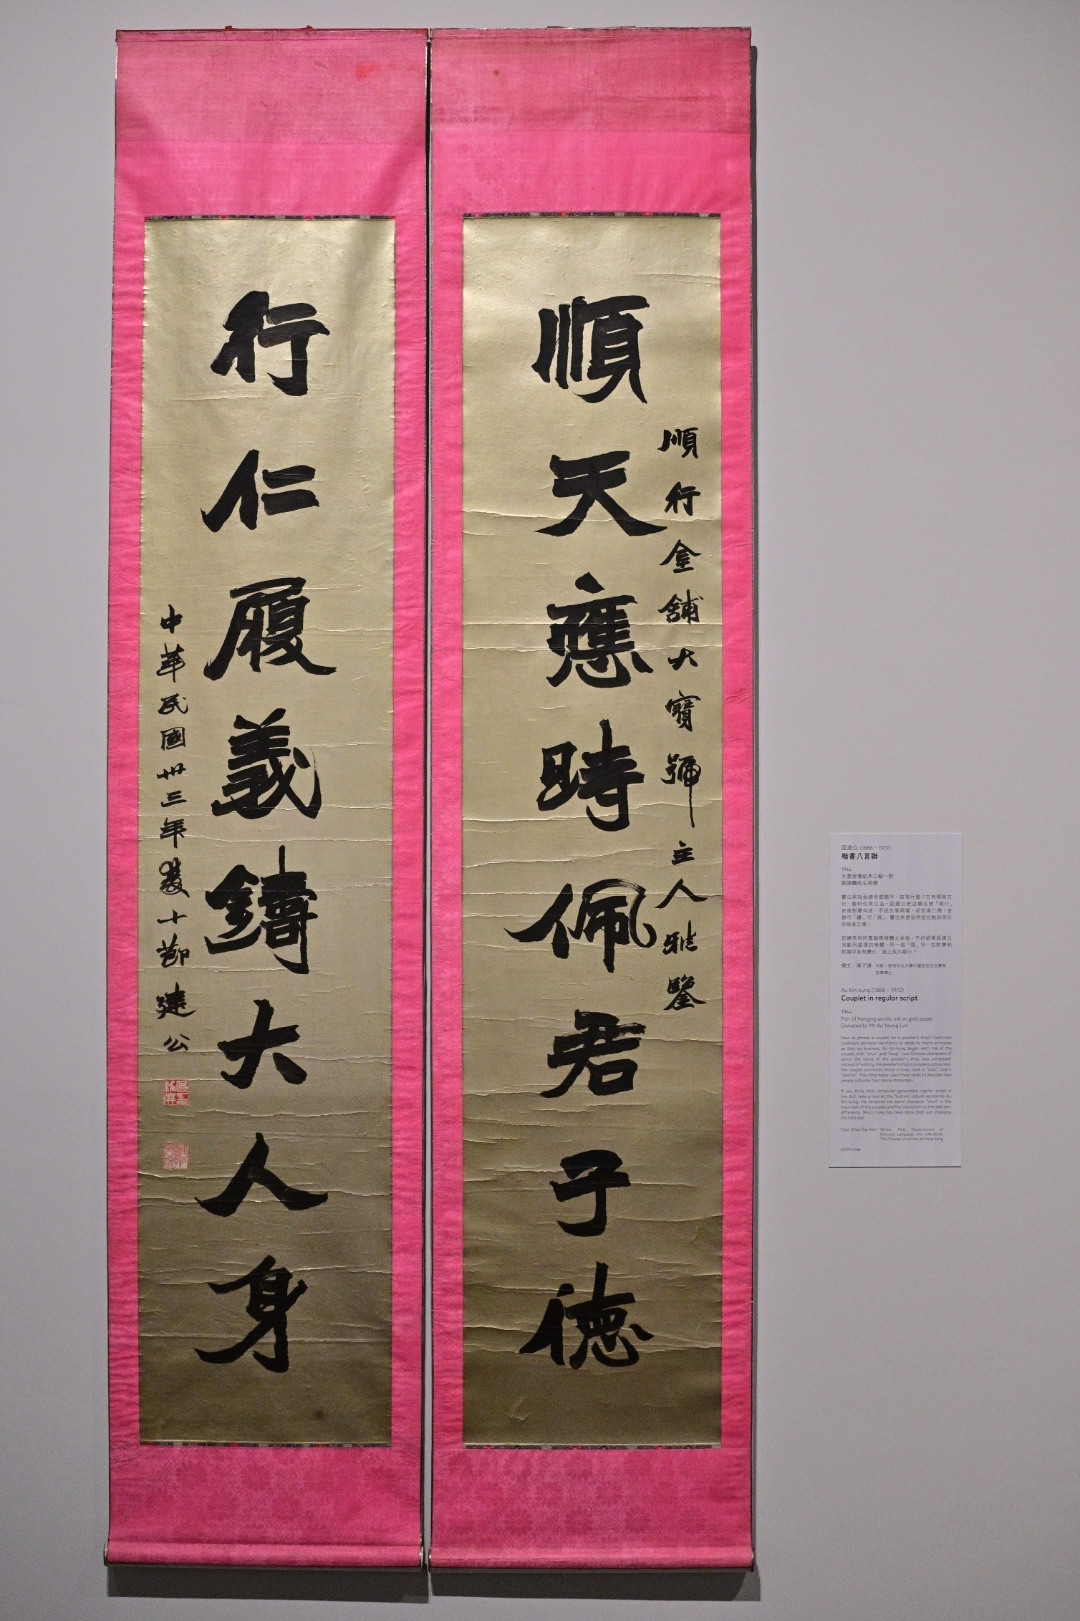 The "City Rhymes: The Melodious Notes of Calligraphy" exhibition will be held from tomorrow (July 22) at the Hong Kong Museum of Art. Photo shows Au Kin-kung's "Couplet in regular script".